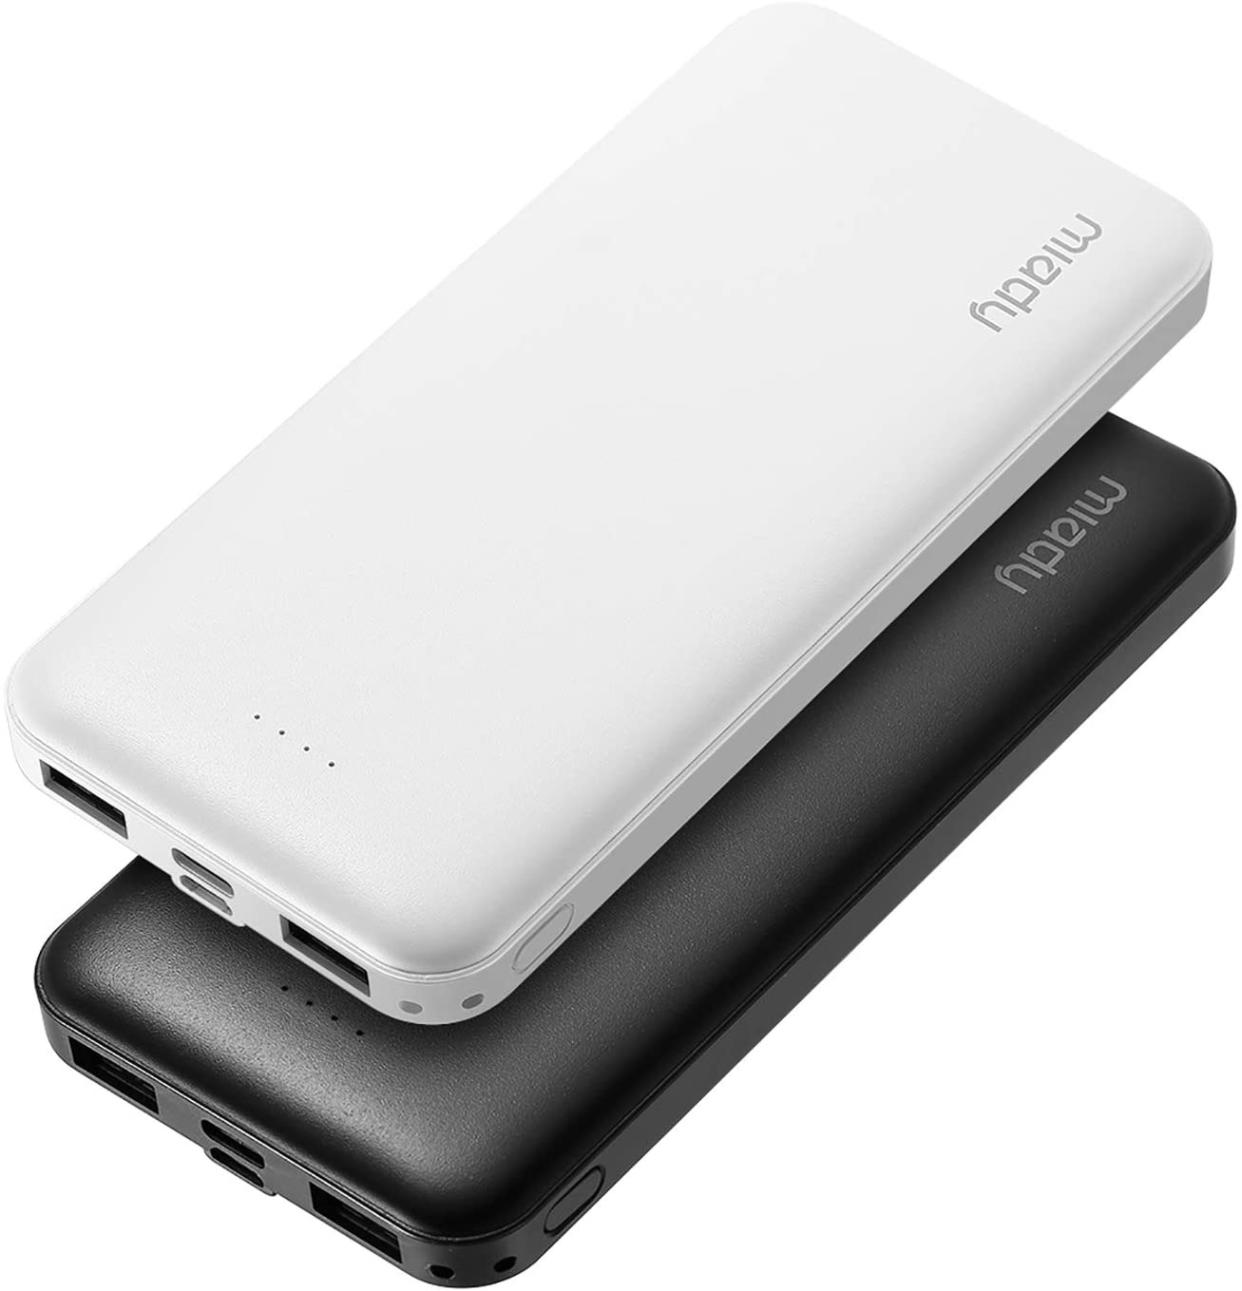 miady portable chargers, layover travel accessories